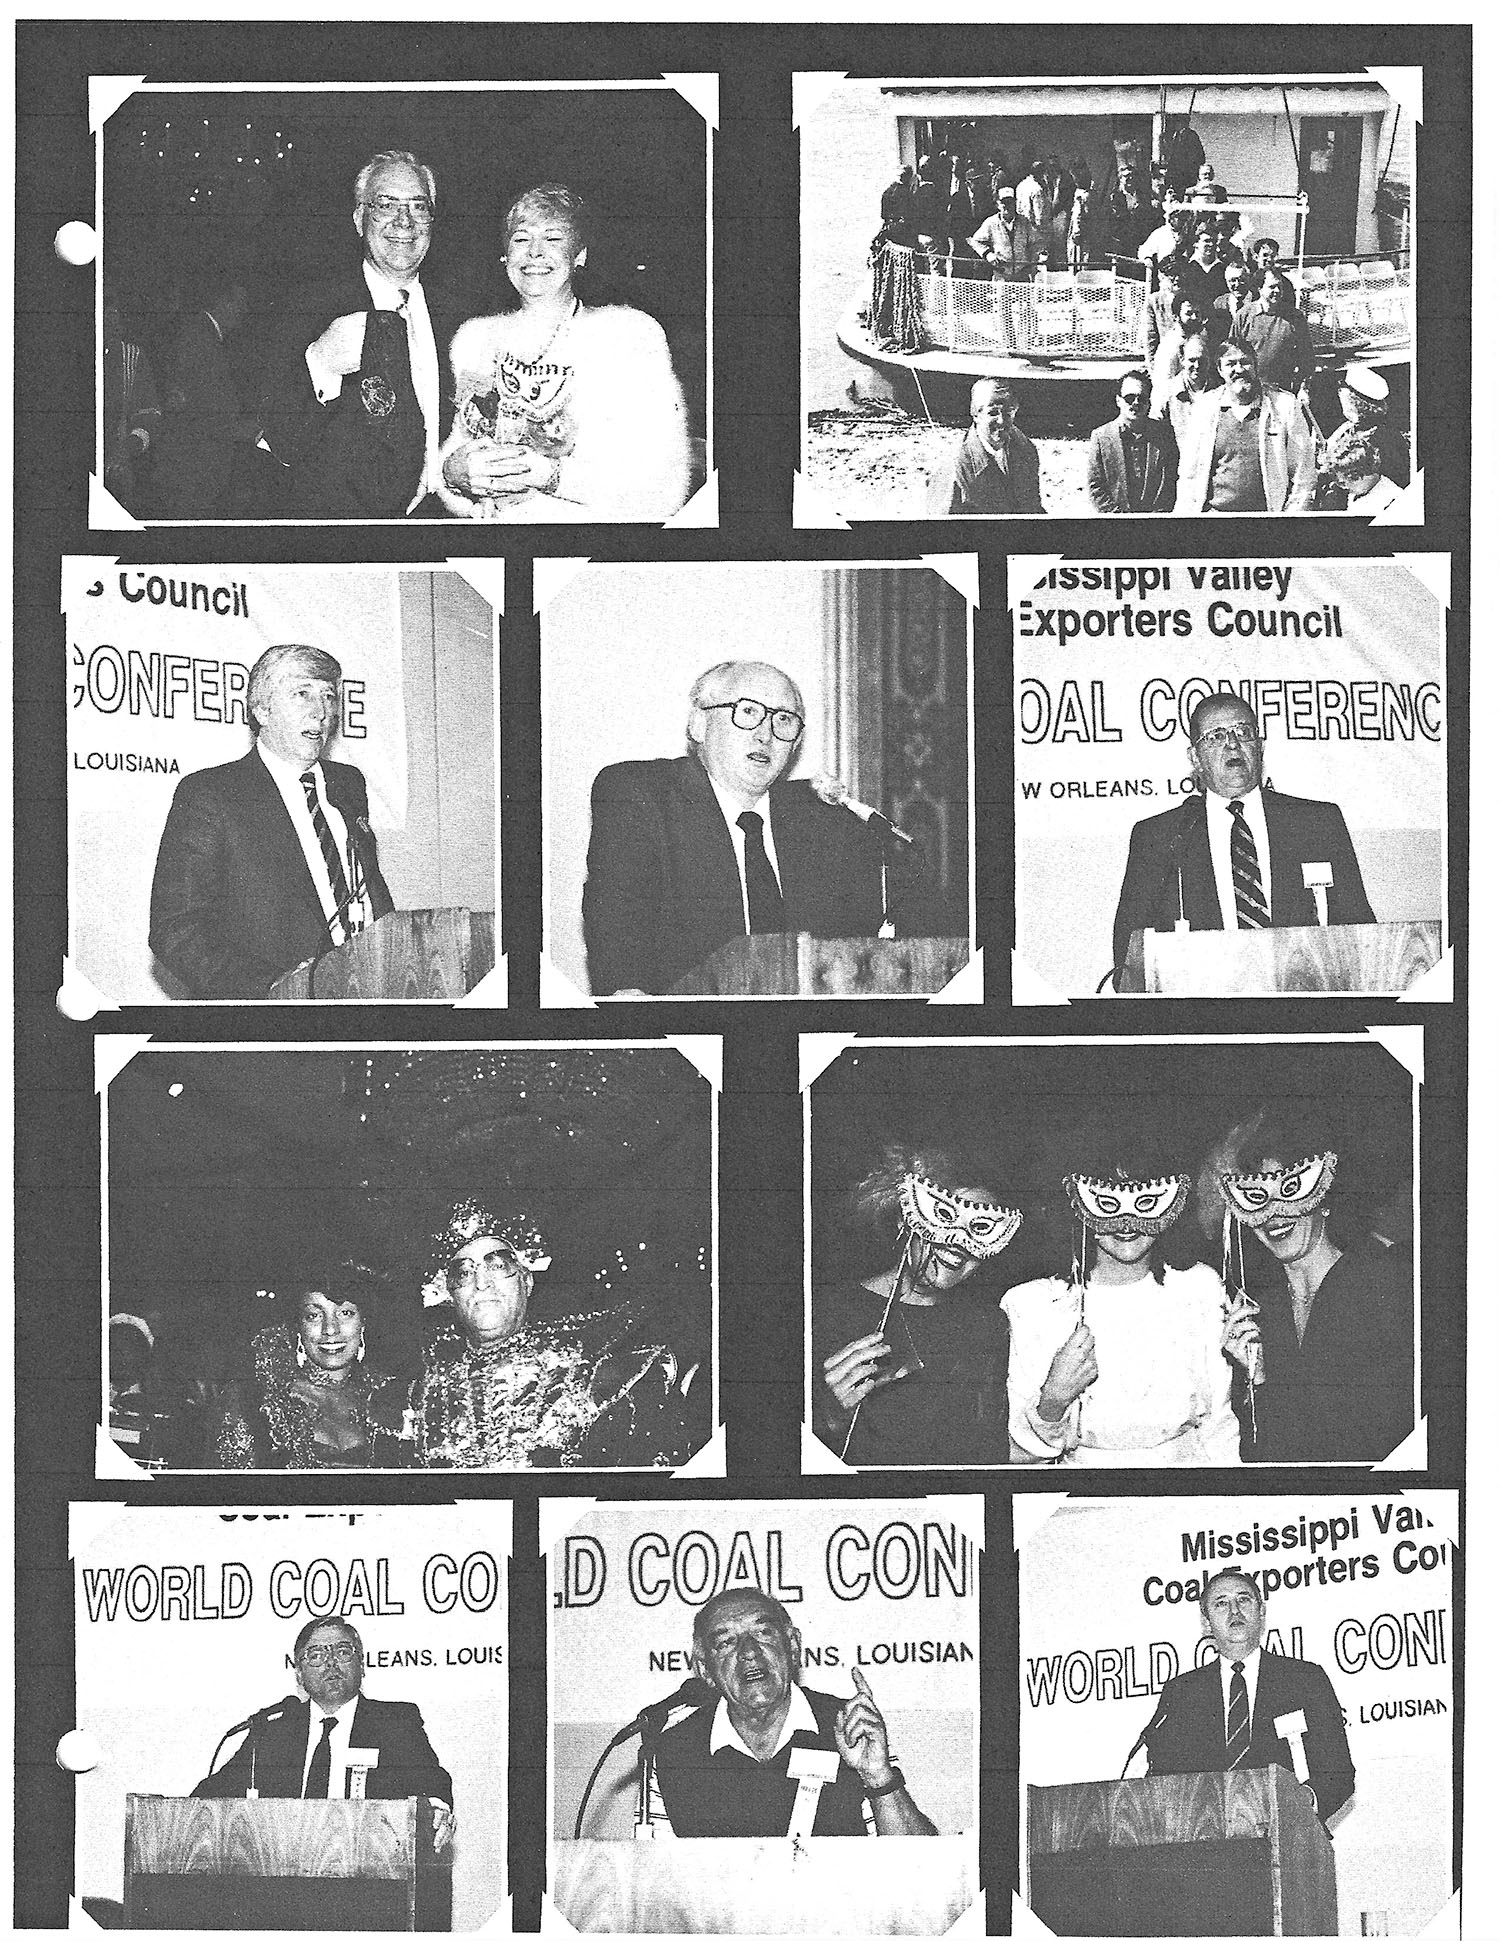 Some scenes from the first MVTTC conference in 1982.